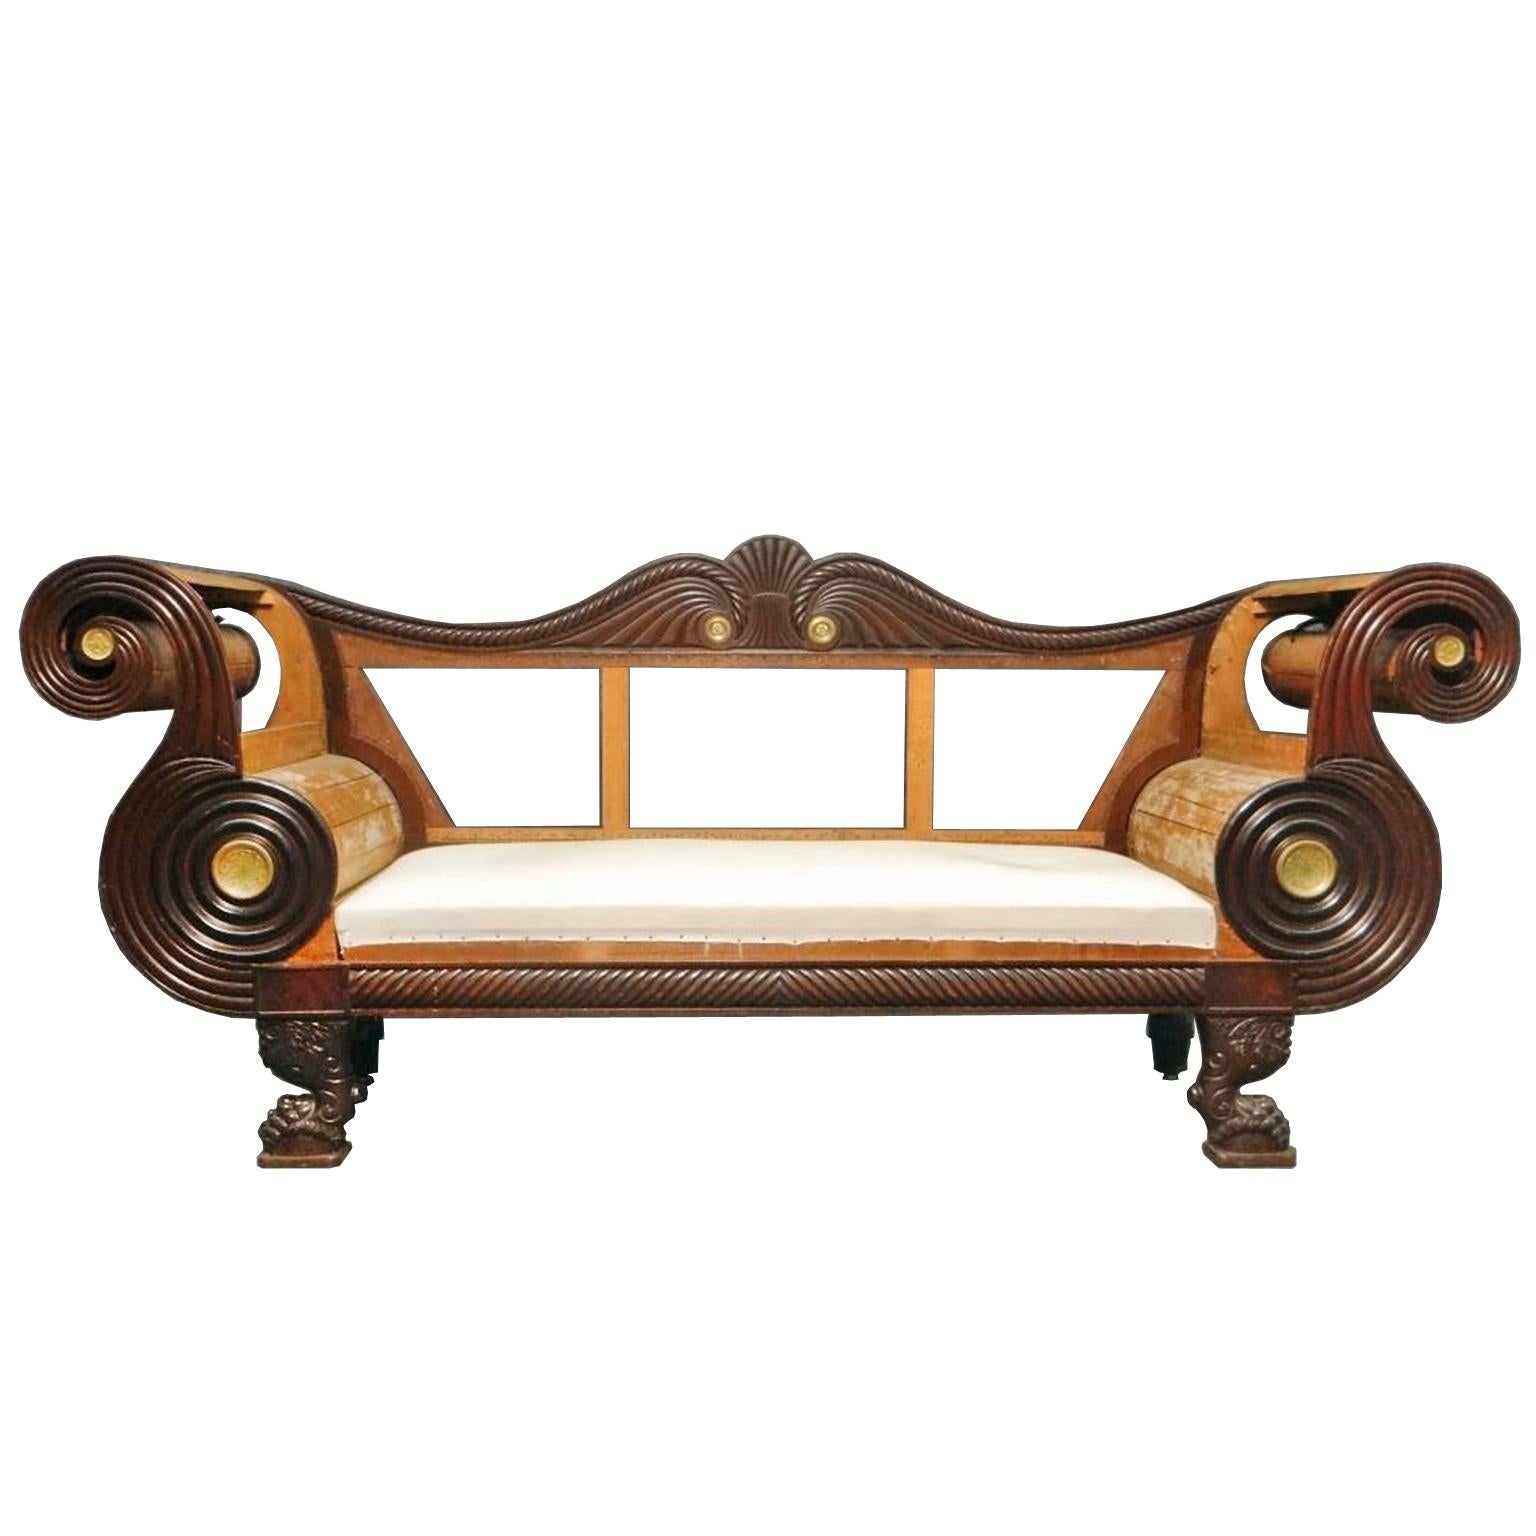 Anything but demure, this handsome and beautifully-crafted neoclassical sofa from Philadelphia is very likely the work of prominent cabinetmaker Joseph B. Barry (1757-1839). With workshops in Philadelphia and Baltimore, his clientele included the